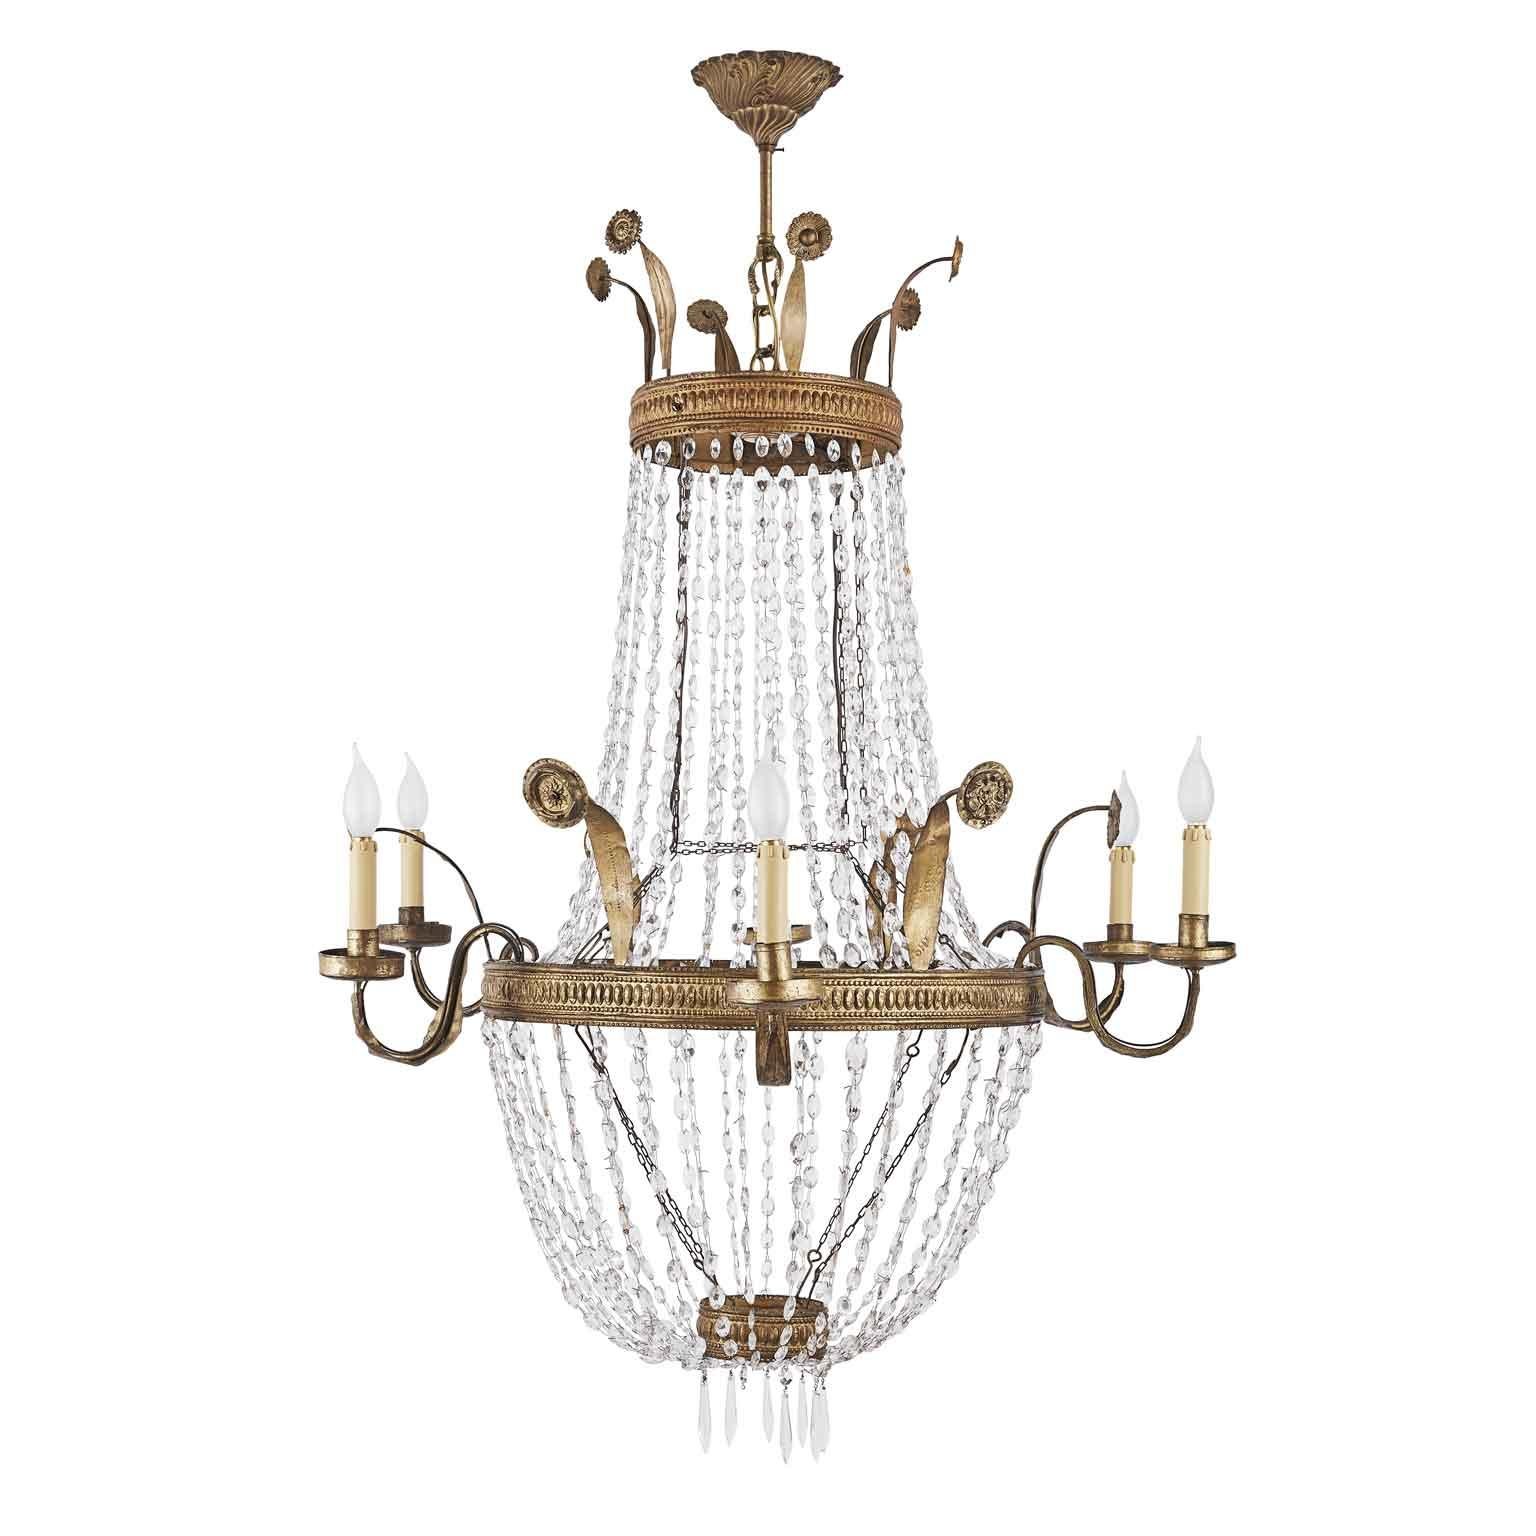 Embossed 19th Century Italian Empire Beaded Crystal Chandelier Six Light For Sale